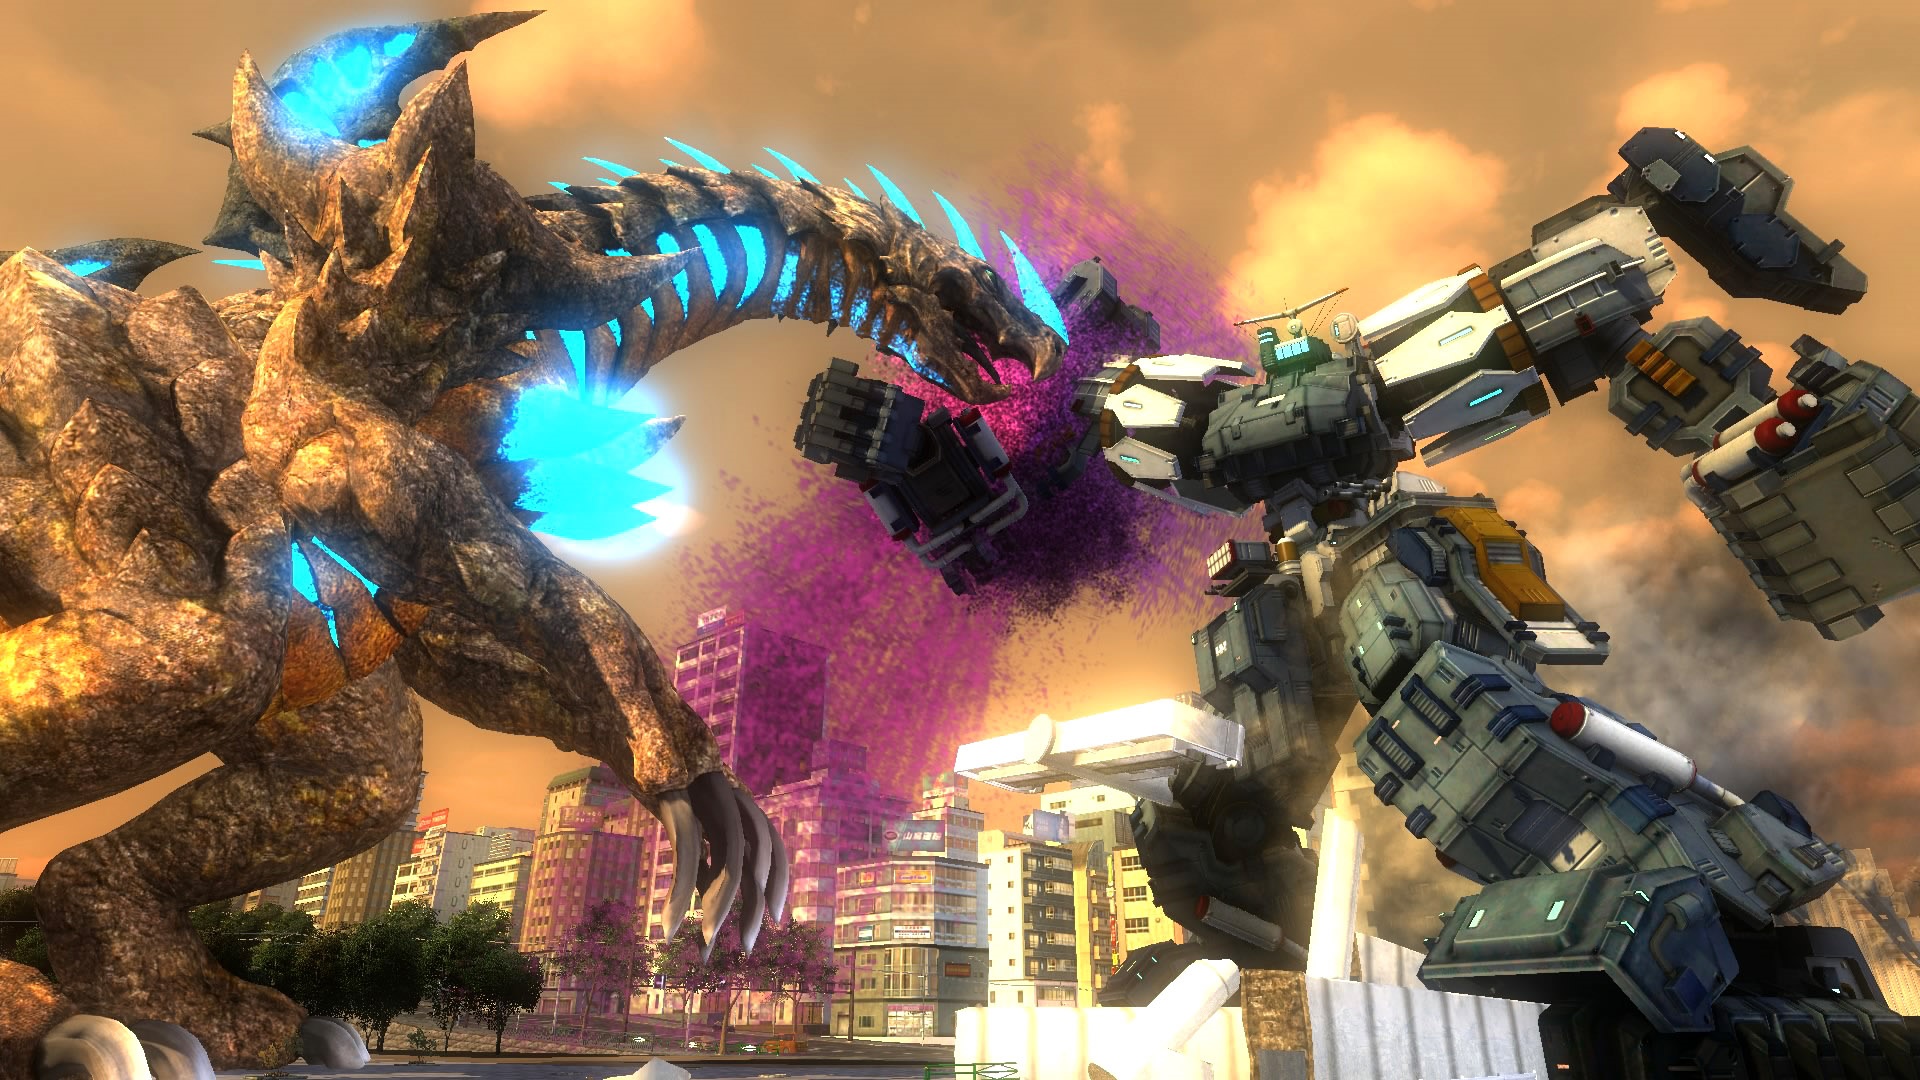 Giant insect vs giant robot in Earth Defense Force 4.1: The Shadow of New Despair, one of the best robot games